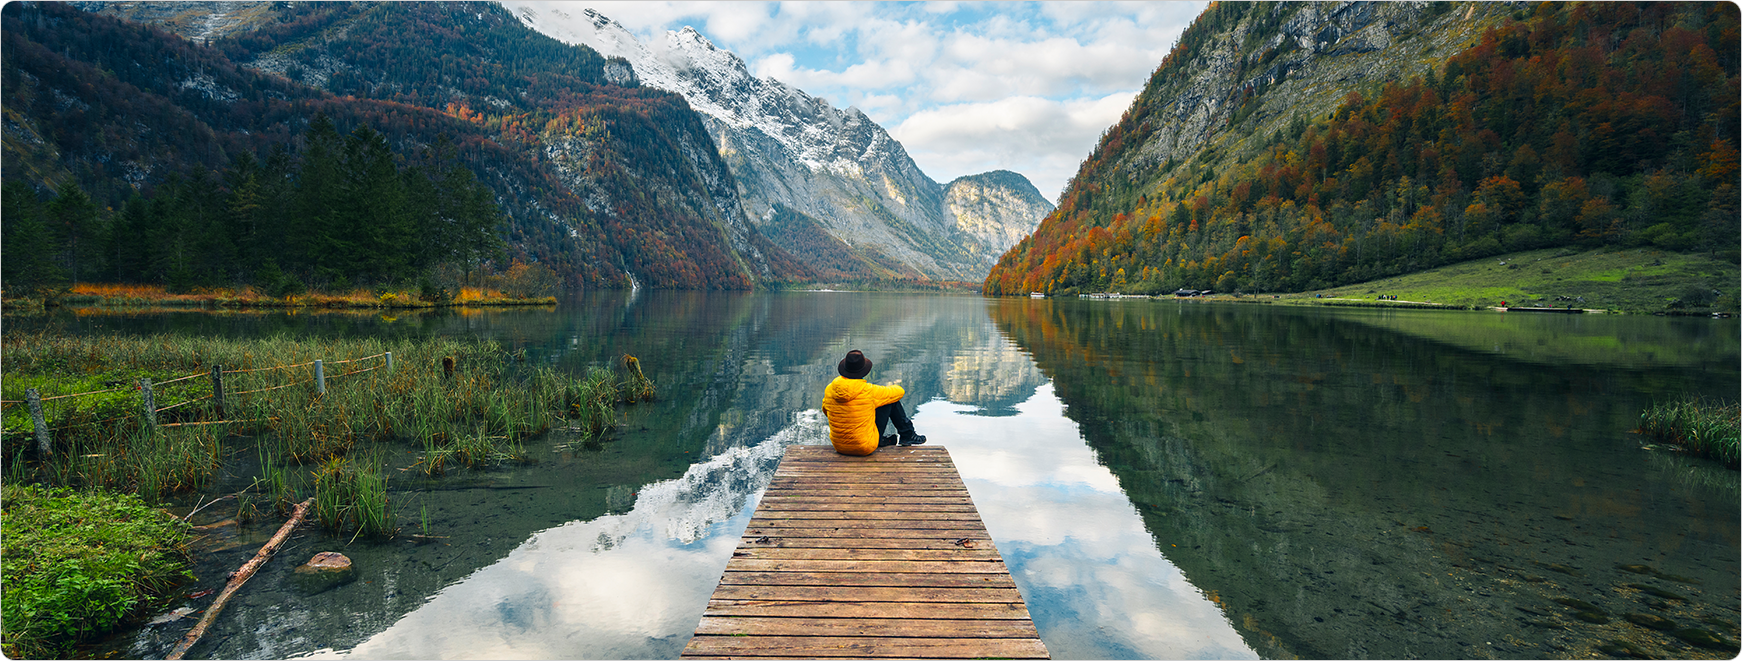 Image of man sitting at edge of a dock enjoying the moutain scenery